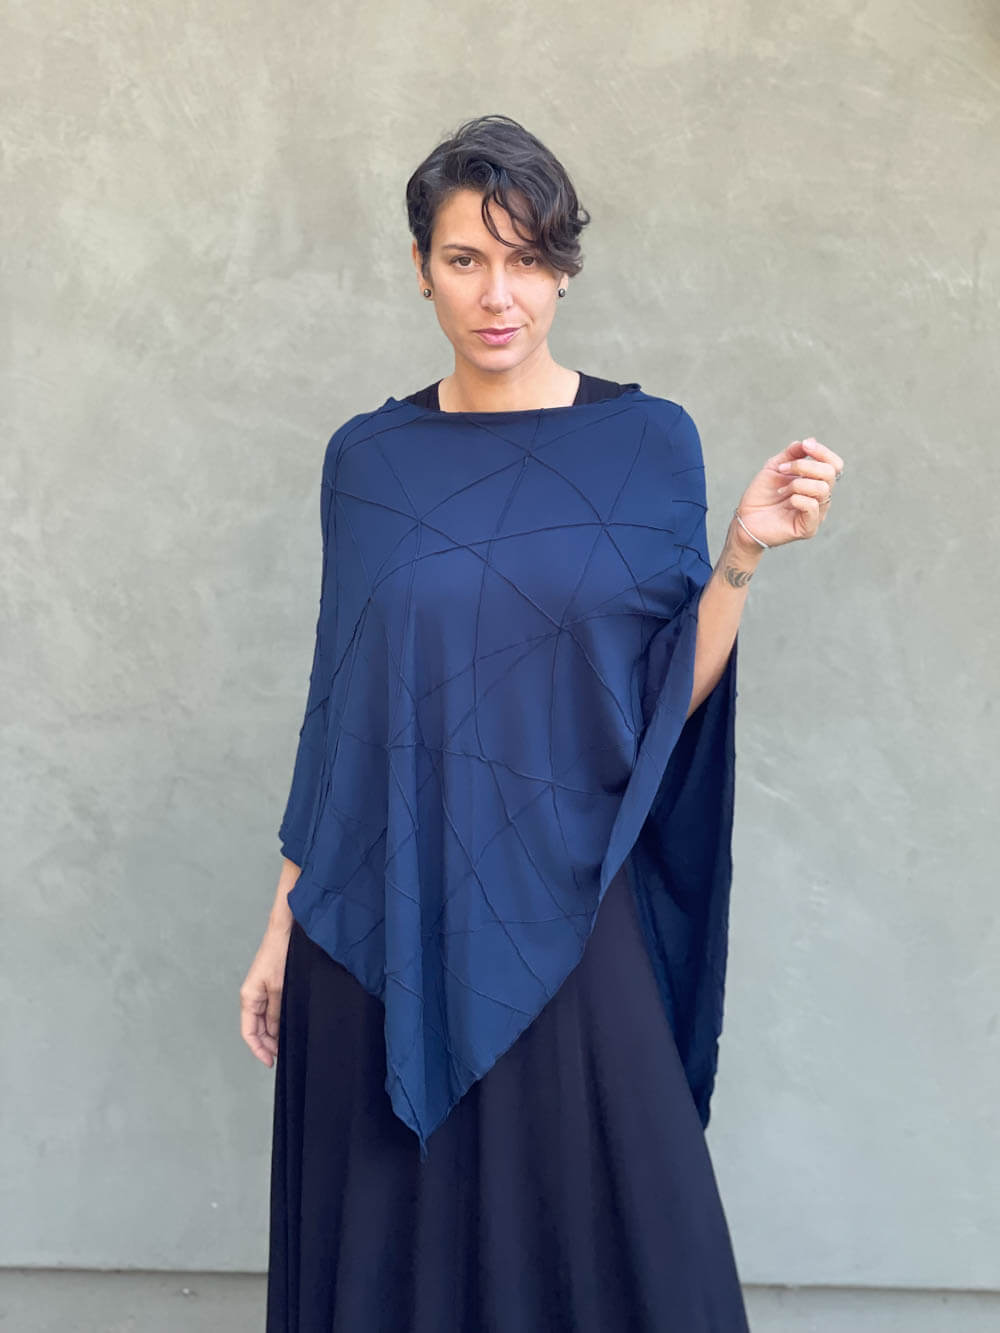 caraucci women's plant based rayon jersey navy blue versatile poncho can be worn multiple ways #color_navy